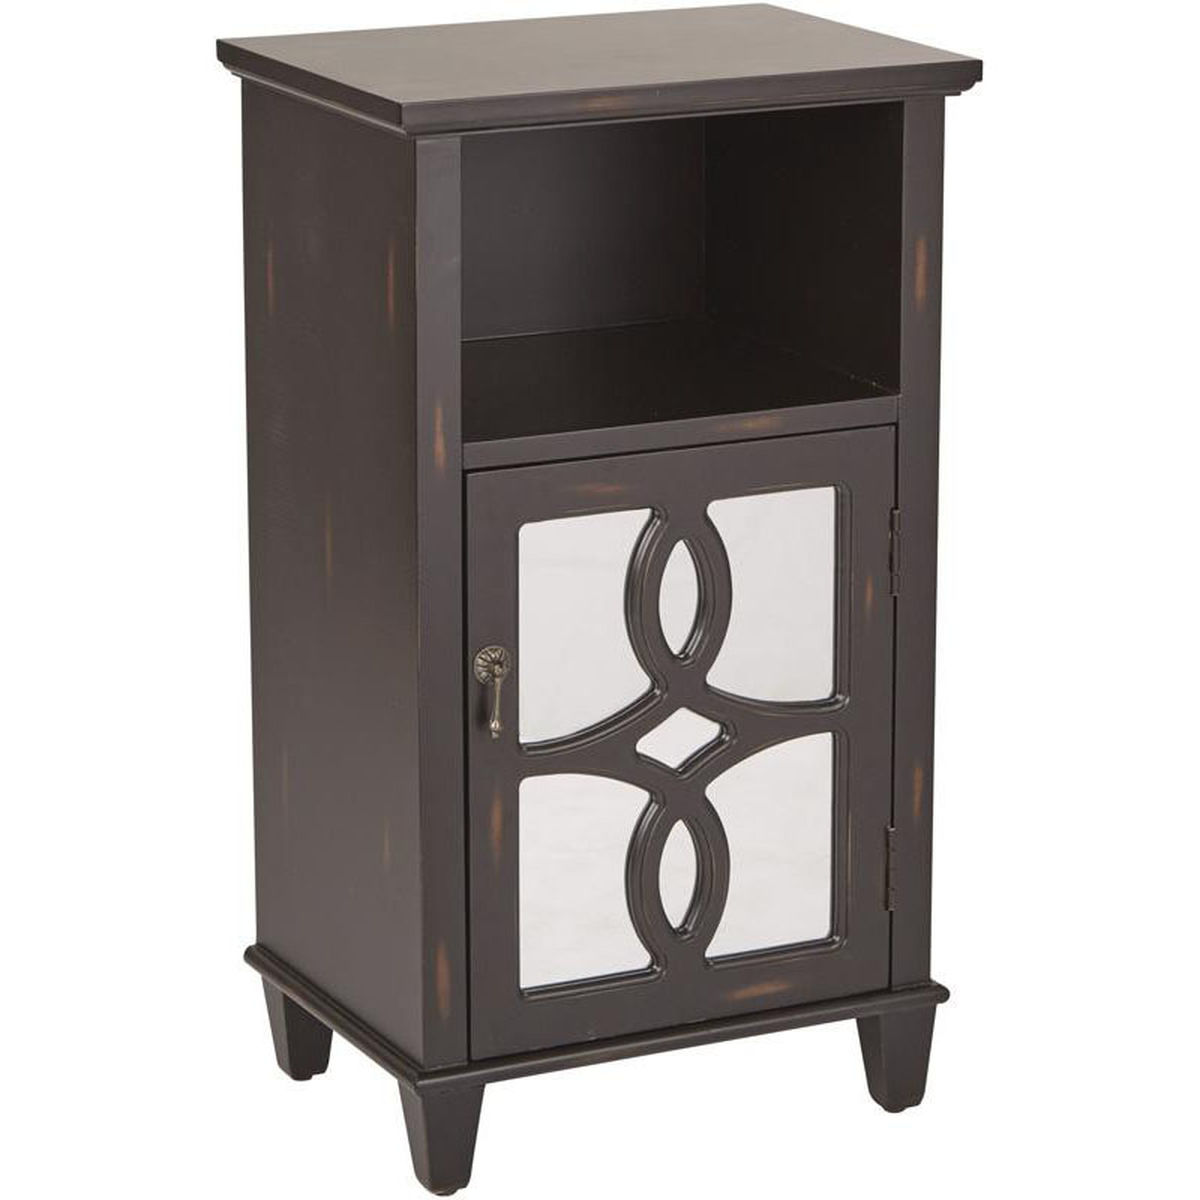 medina black accent table bizchair office star products main tall with drawer our inspired bassett hand painted antique now mimosa outdoor furniture rustic sliding door room